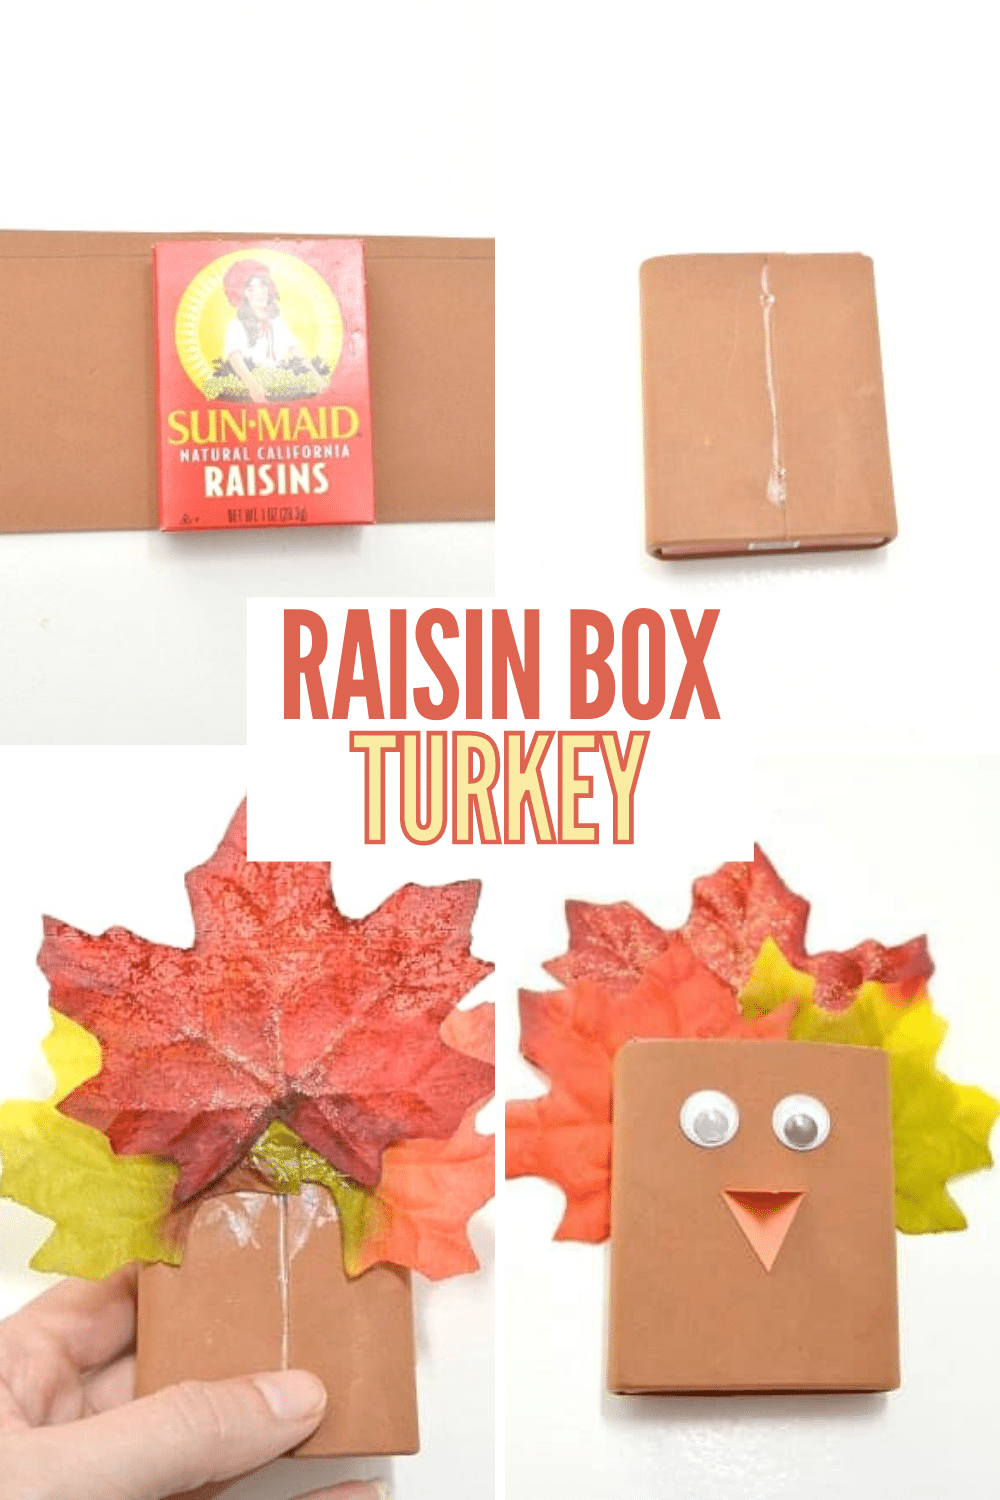 This raisin box turkey is a fun way to transform an ordinary snack into a fun treat that can double as a decoration for the kids table at Thanksgiving. #thanksgiving #craft #forkids #turkeycraft via @wondermomwannab